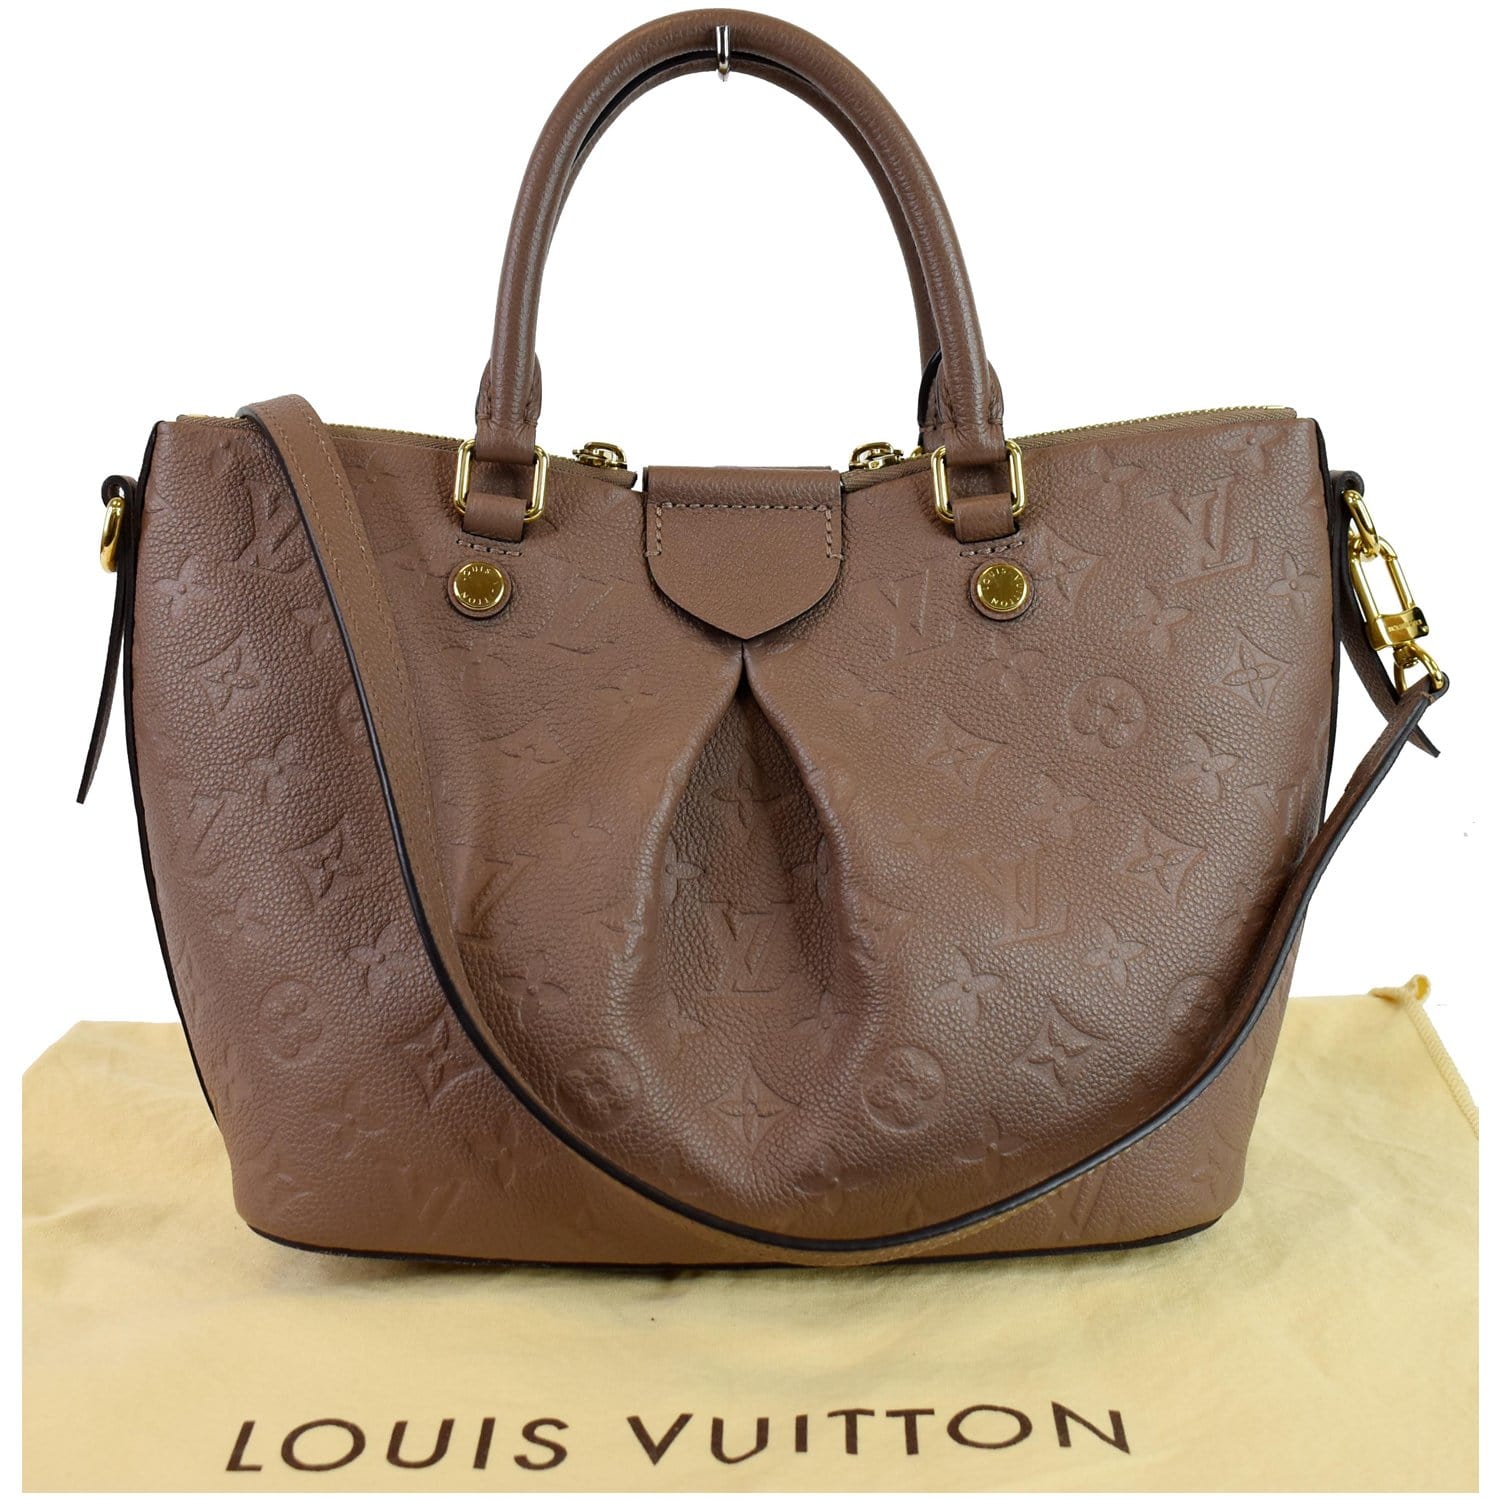 Louis Vuitton Mazarine review and impressions 